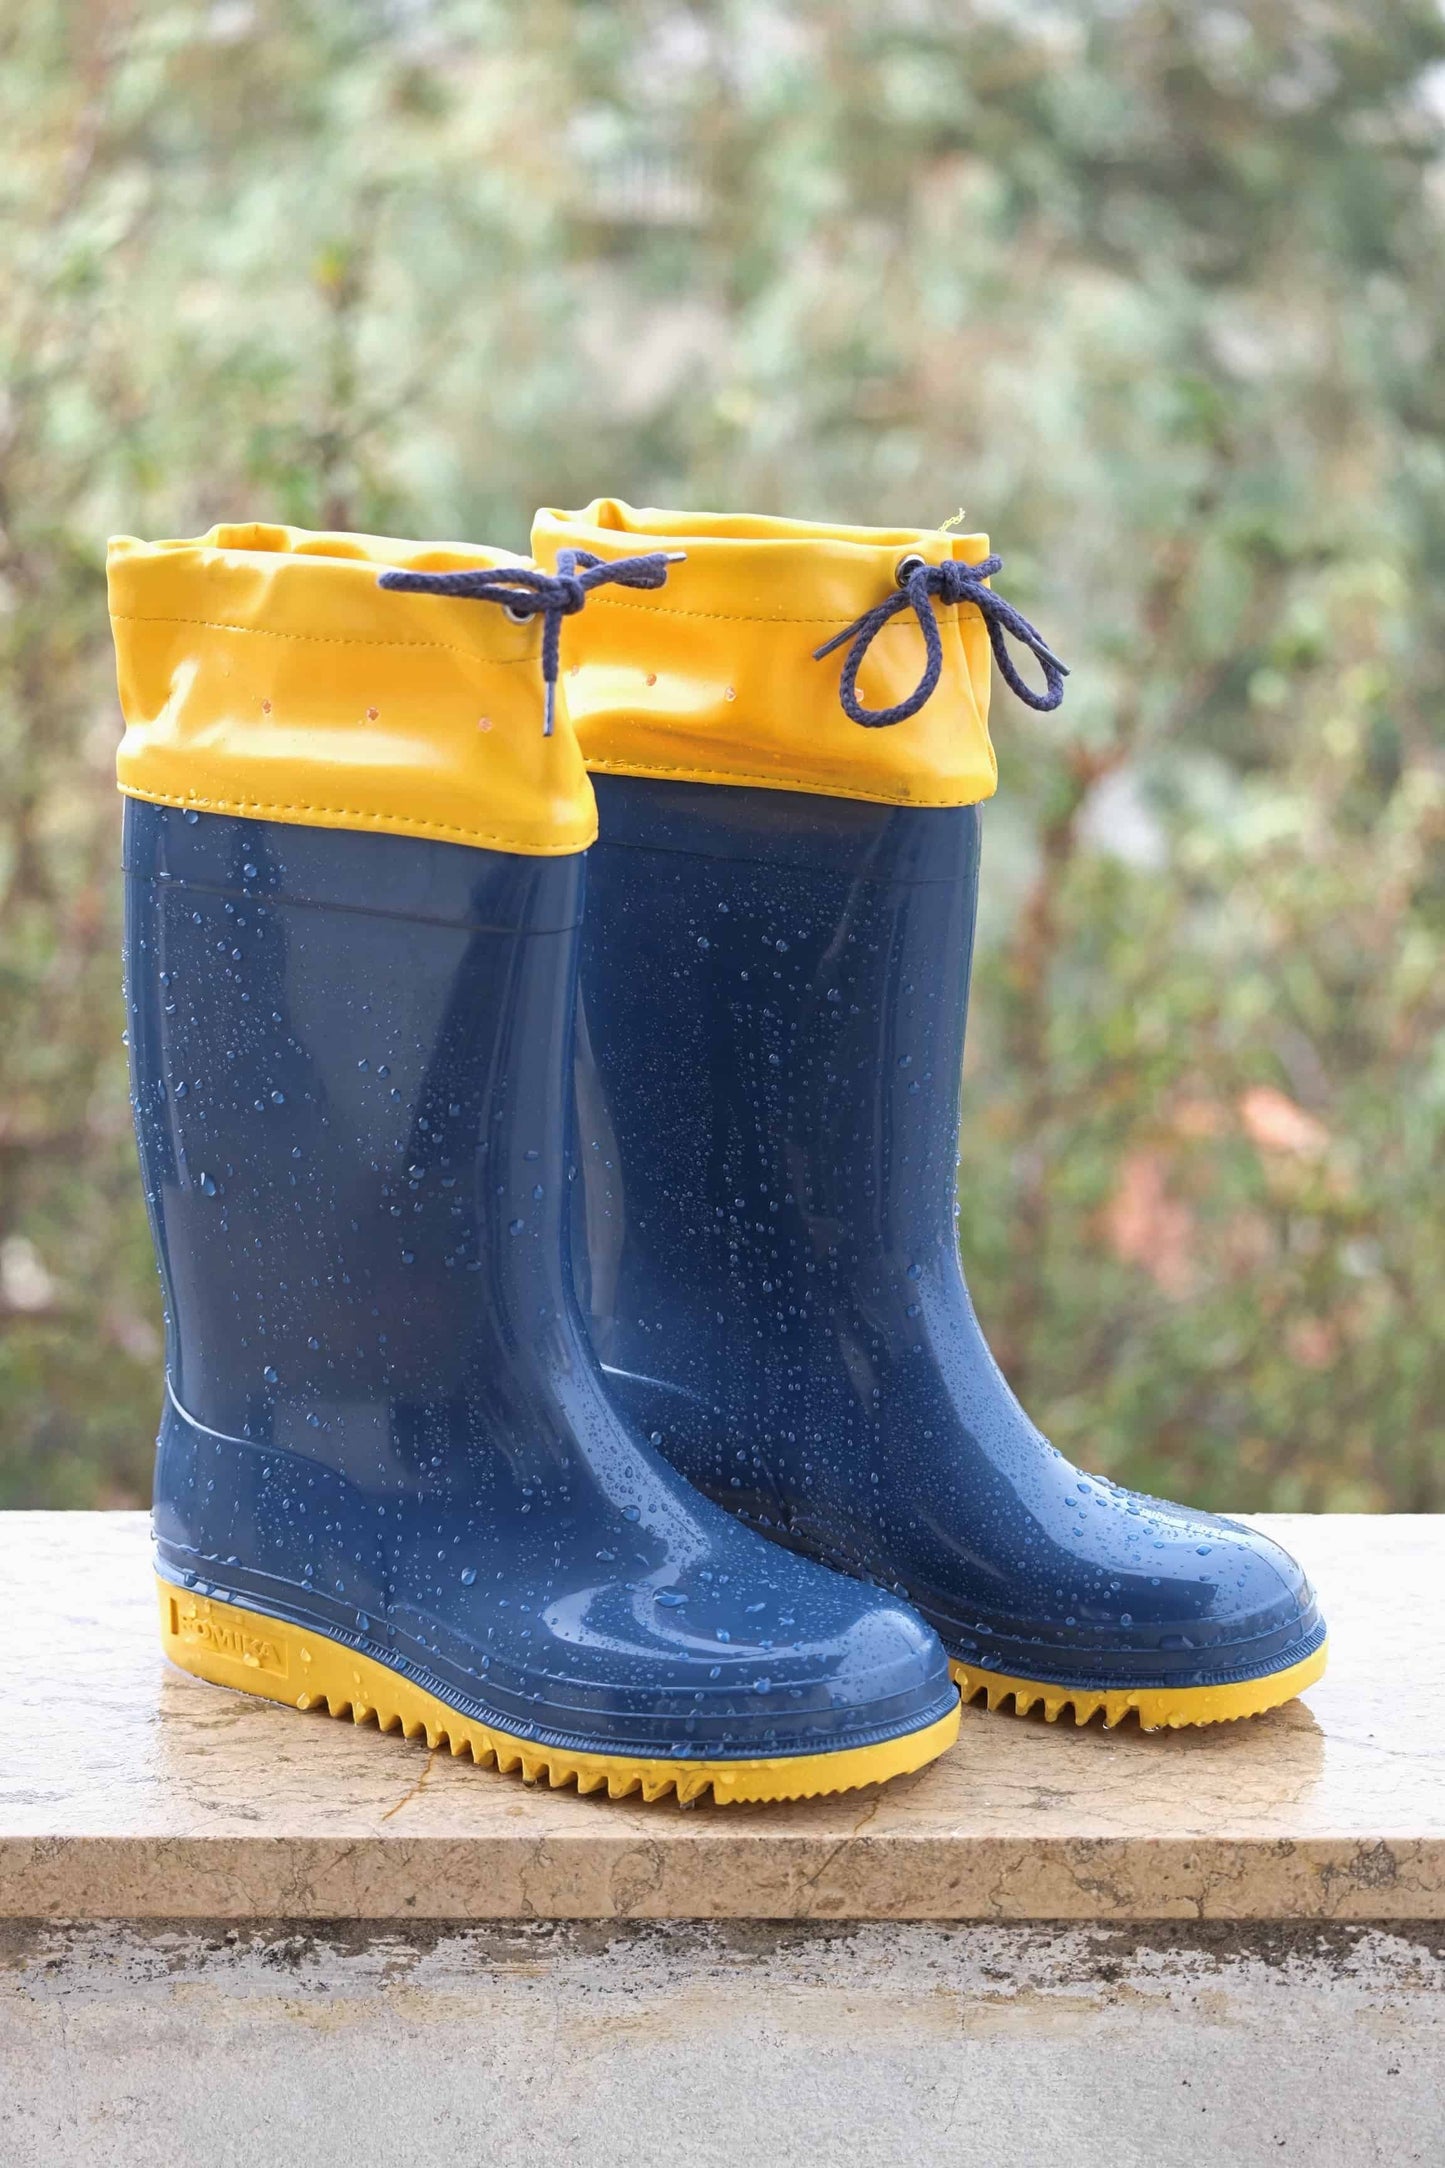 Navy and yellow ROMIKA Bobby Rain Boots on a ledge in the rain